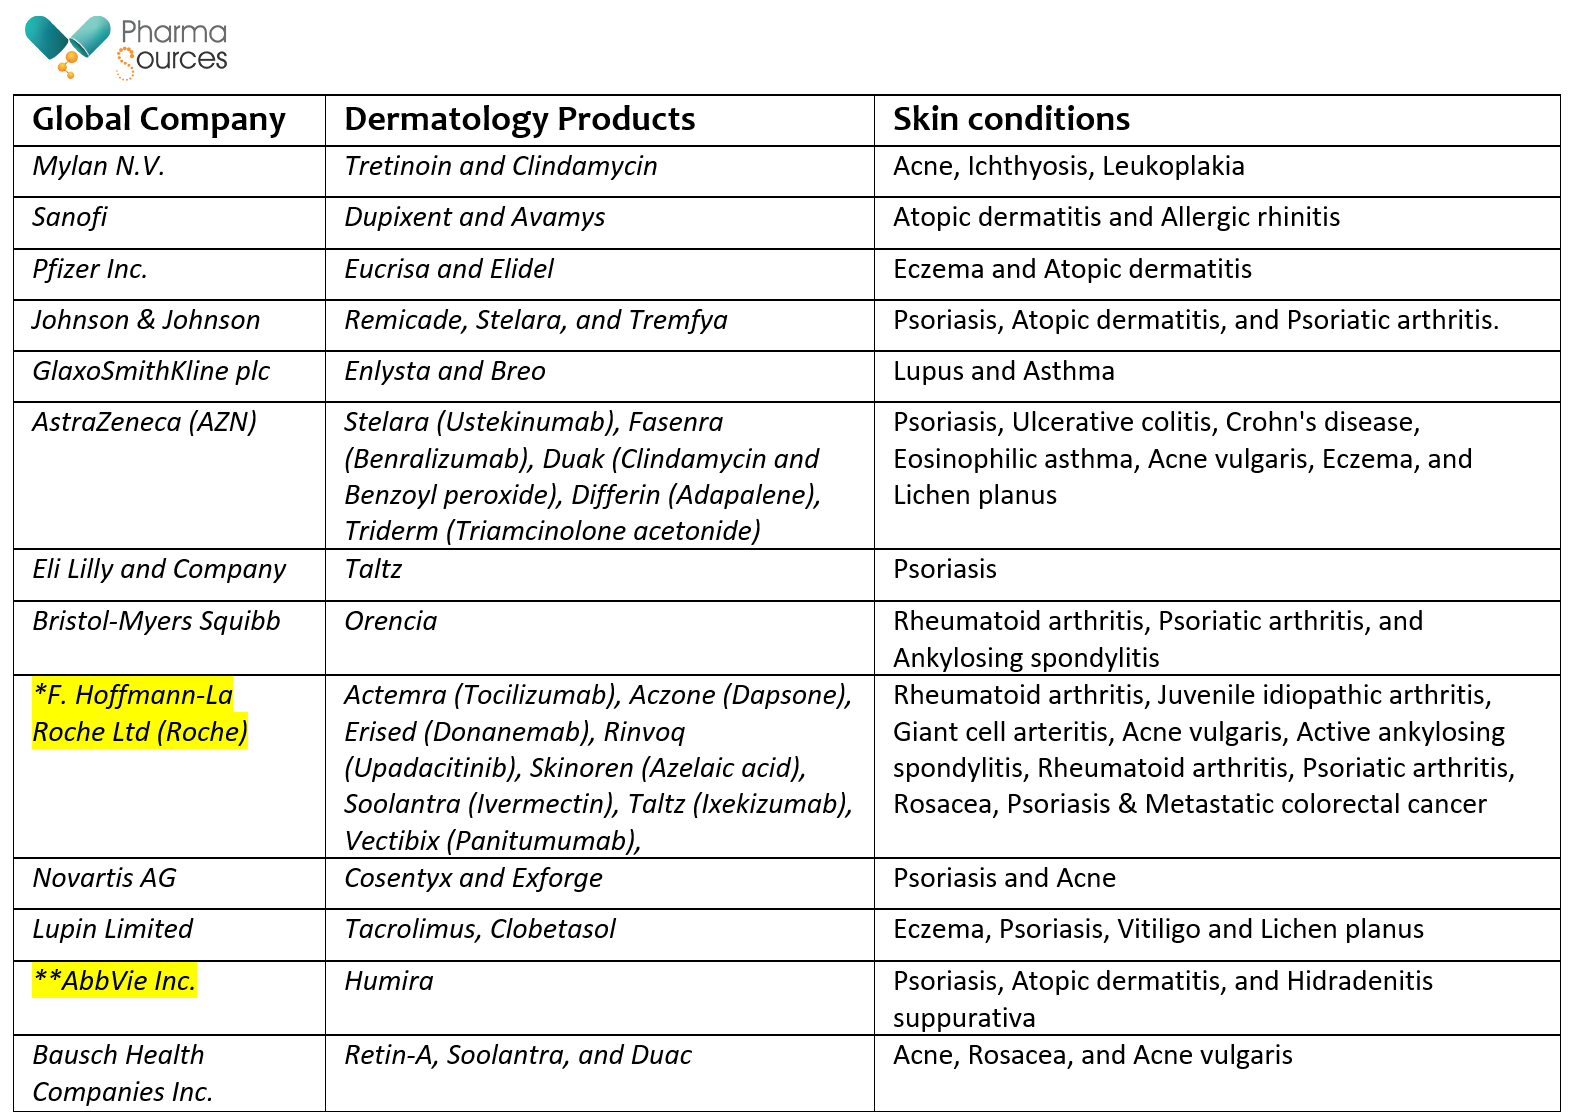 Tabe 1. Below table complies the top companies manufacturing various dermatology products and skin conditions.